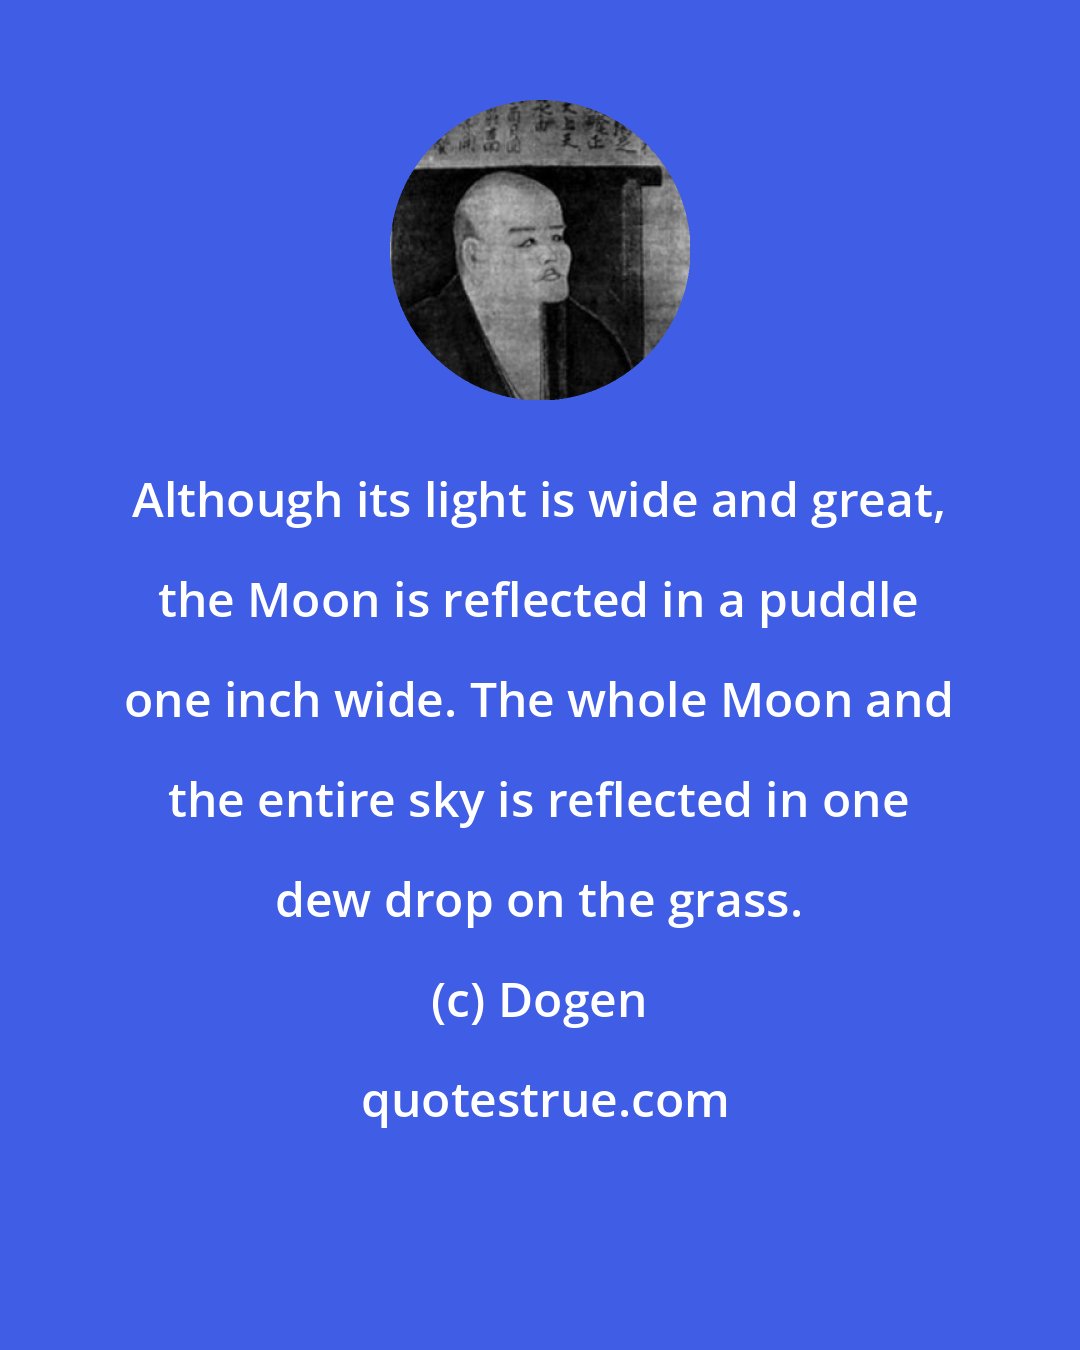 Dogen: Although its light is wide and great, the Moon is reflected in a puddle one inch wide. The whole Moon and the entire sky is reflected in one dew drop on the grass.